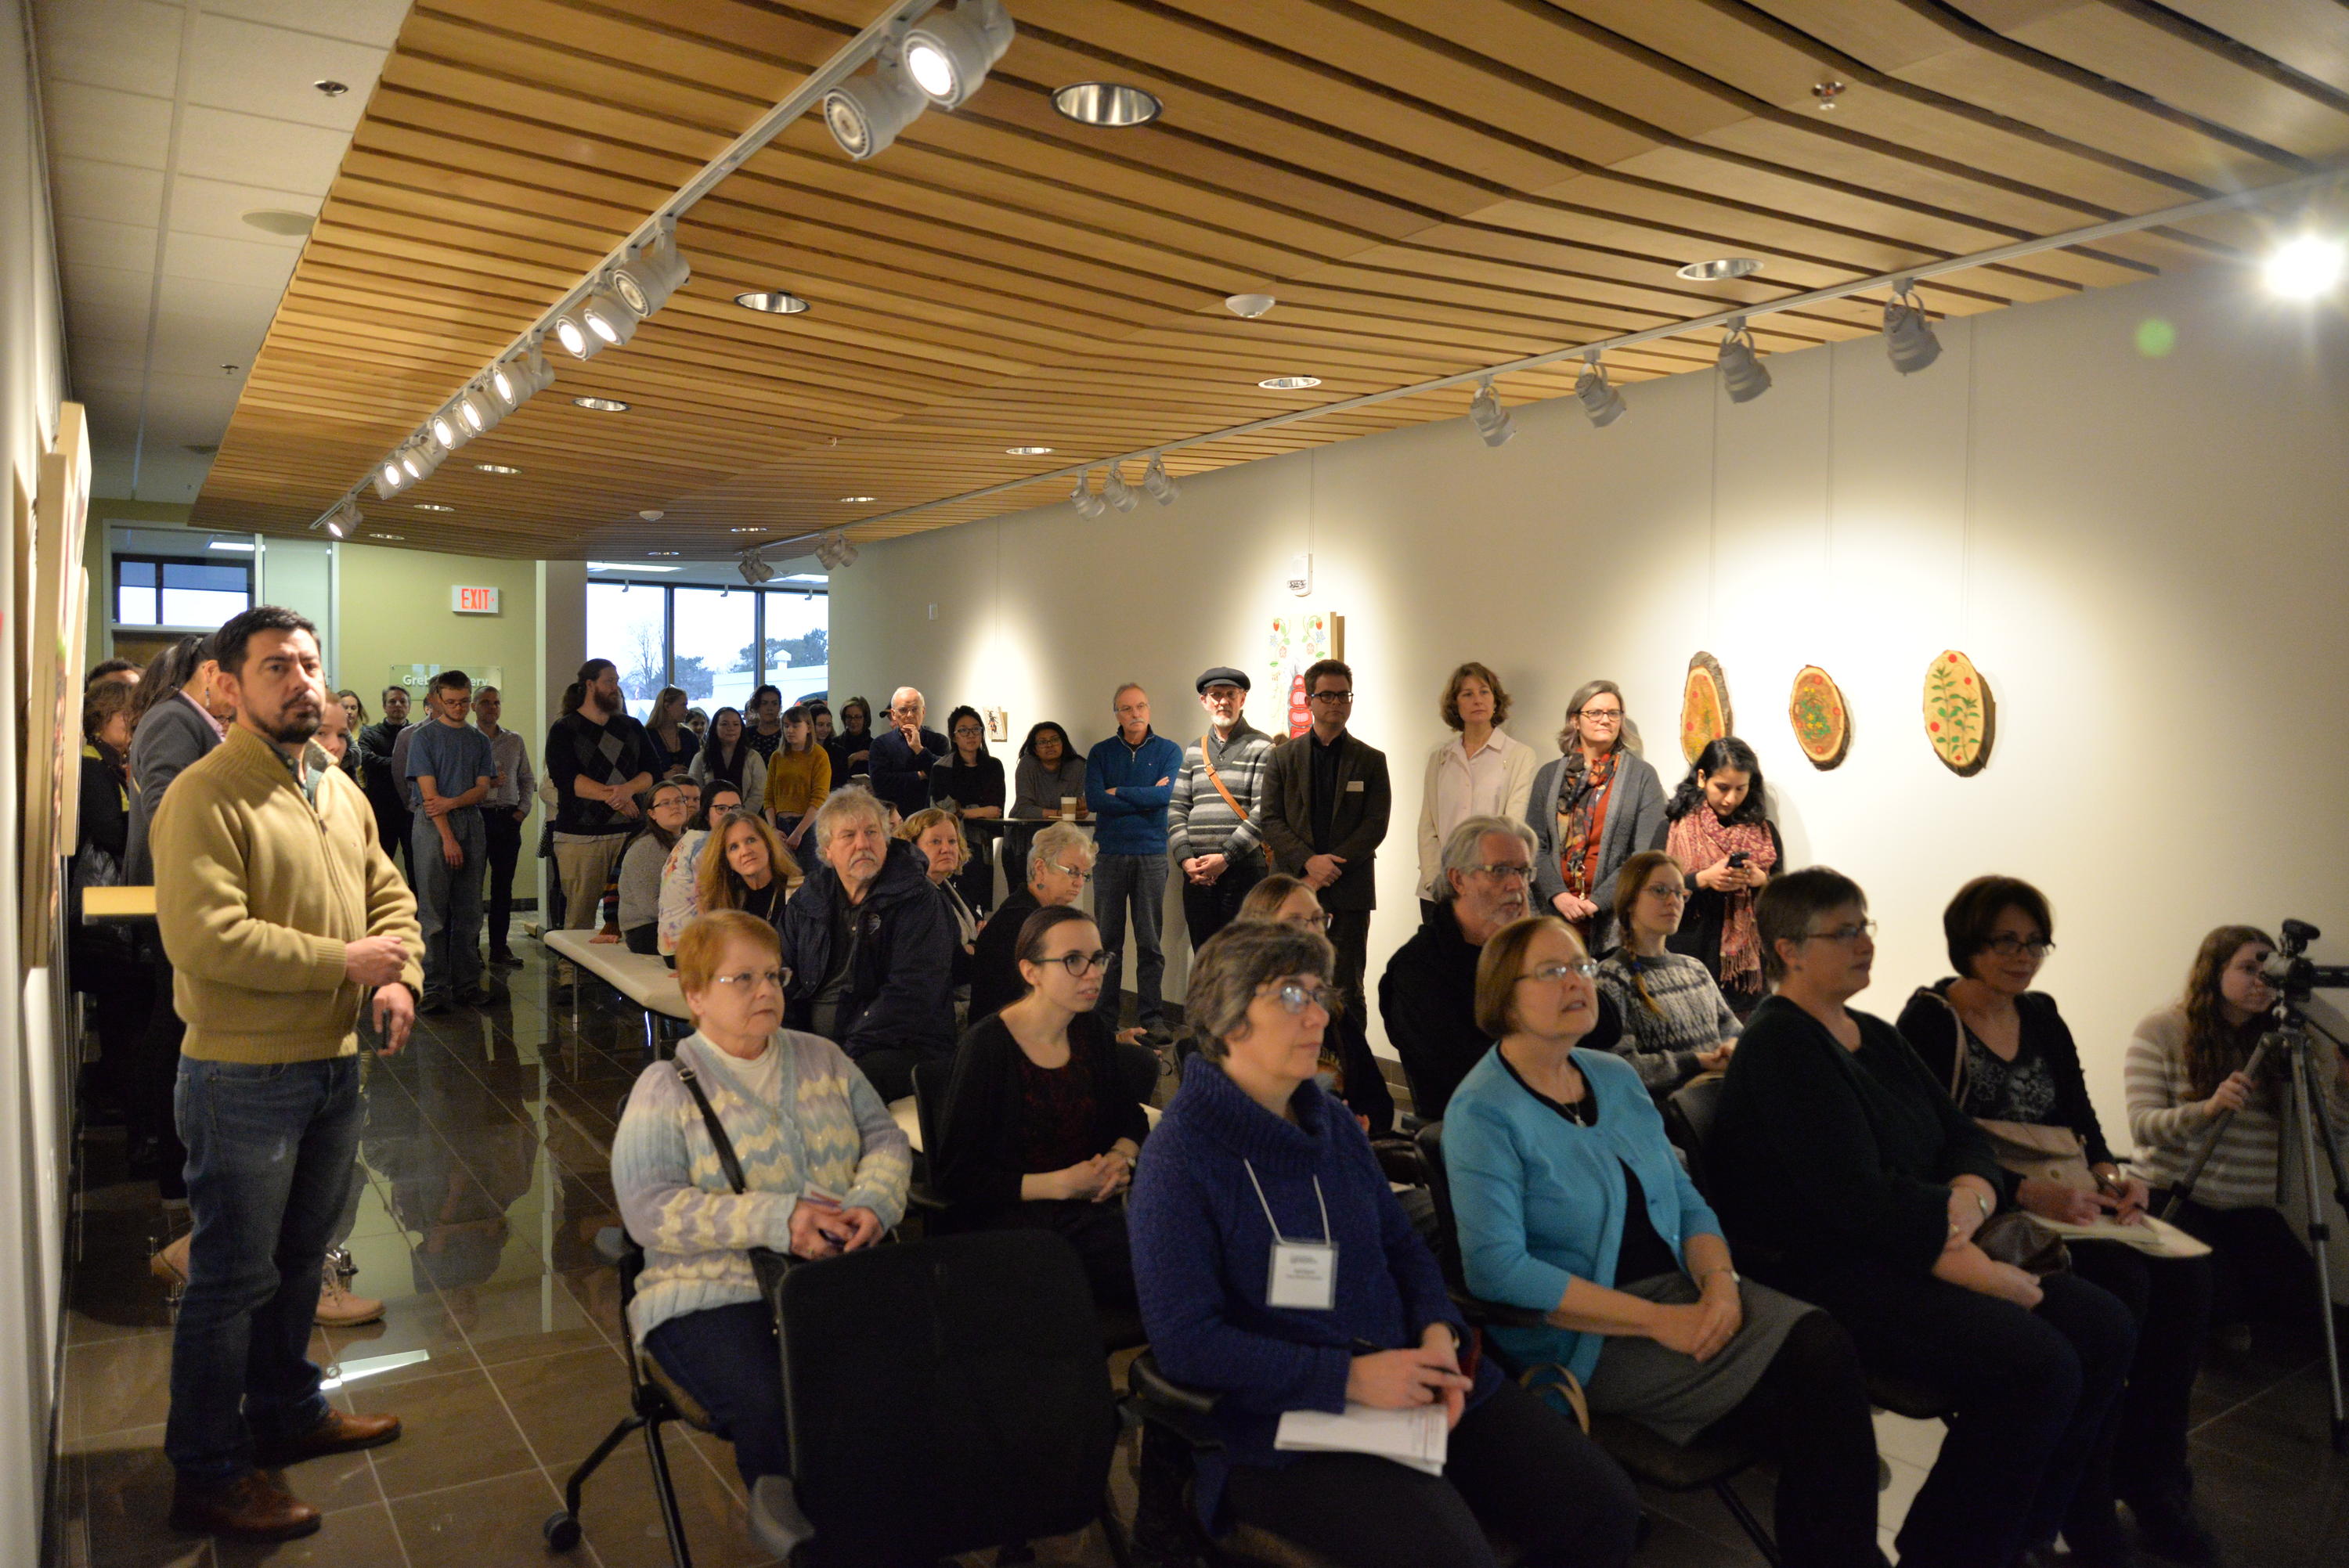 Guests listeneing attentively as Catherine Dallaire speaks about the exhibit